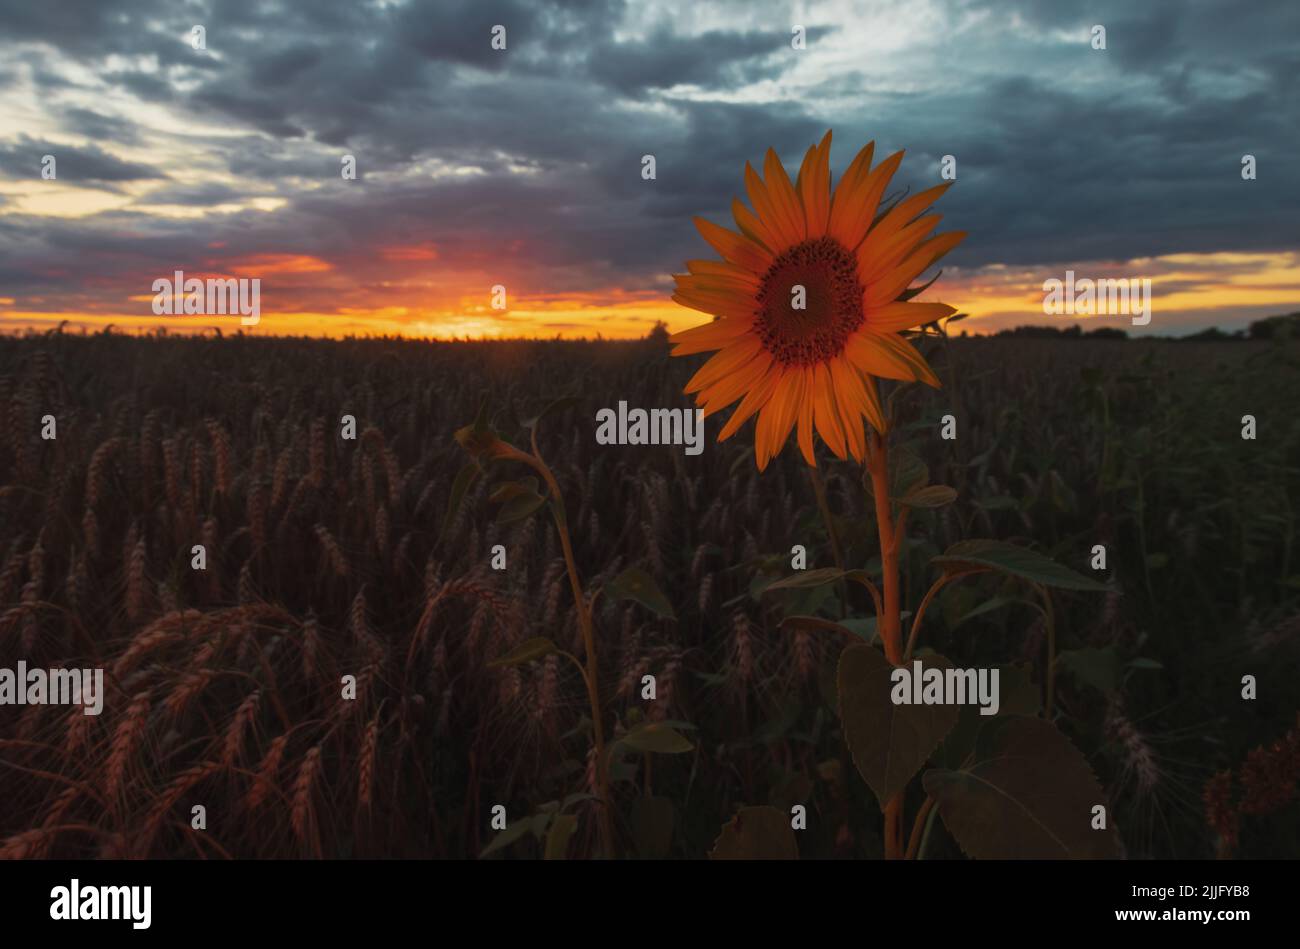 lone sunflower over a field of wheat at sunset Stock Photo